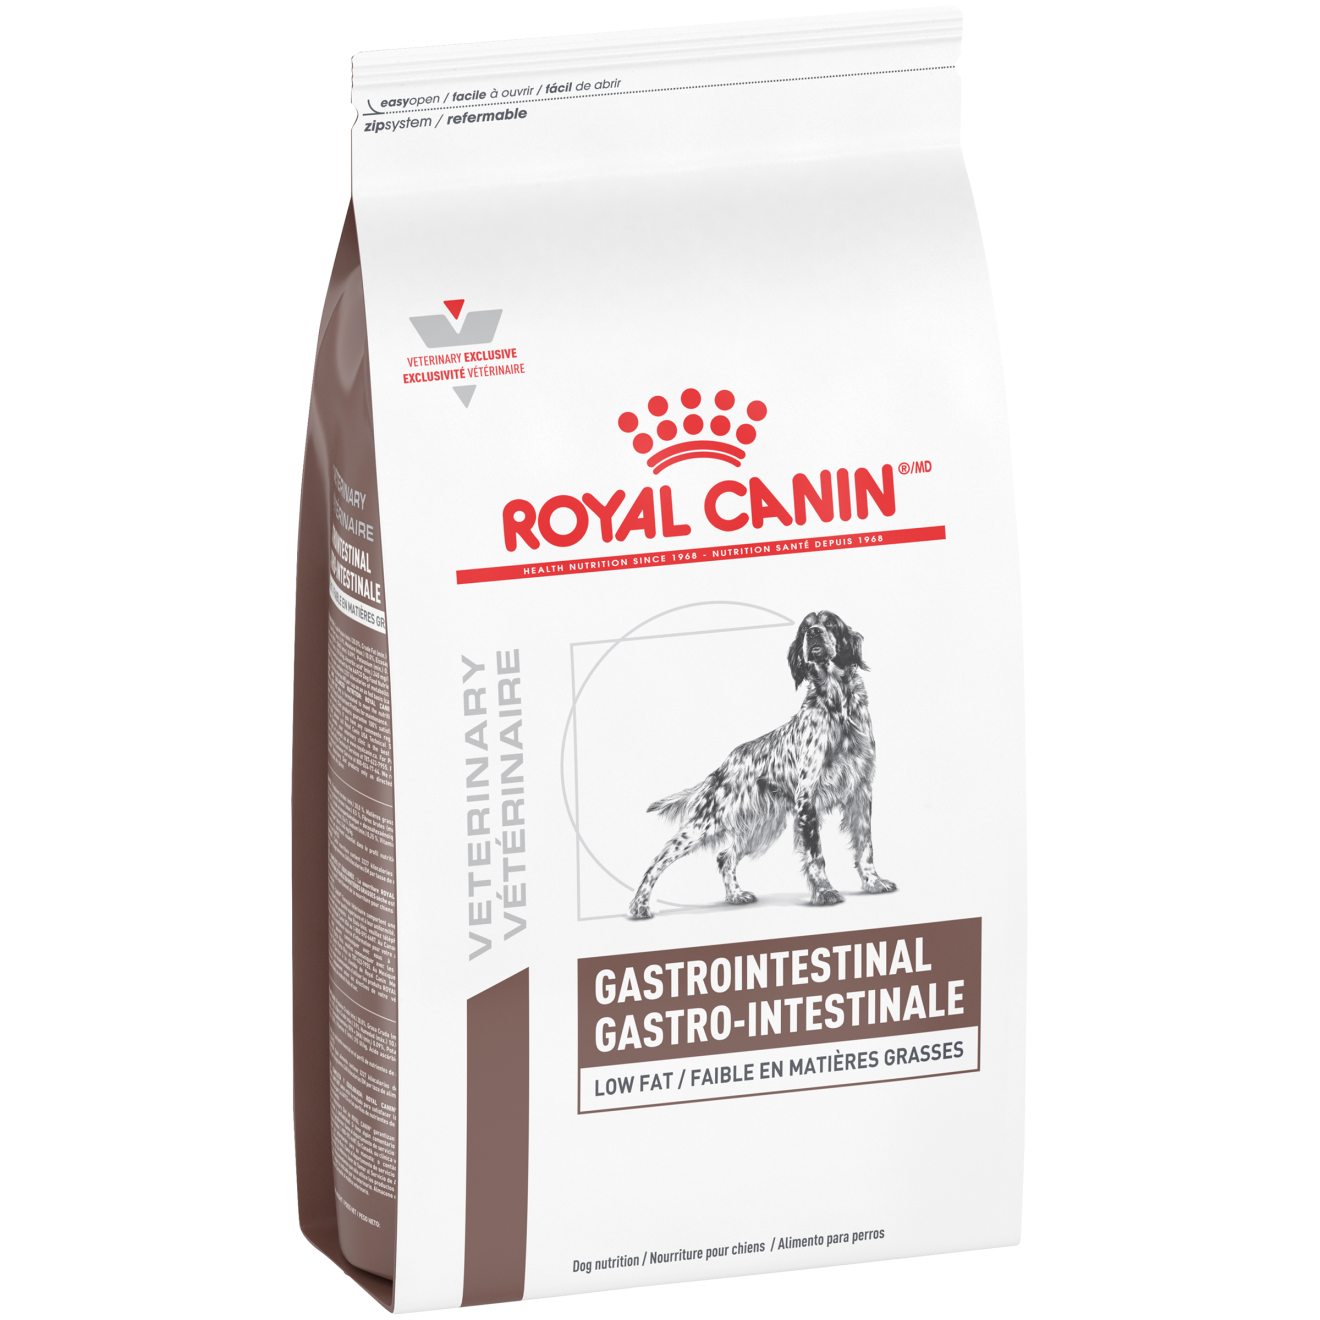 Gastrointestinal low fat product packshot for dogs